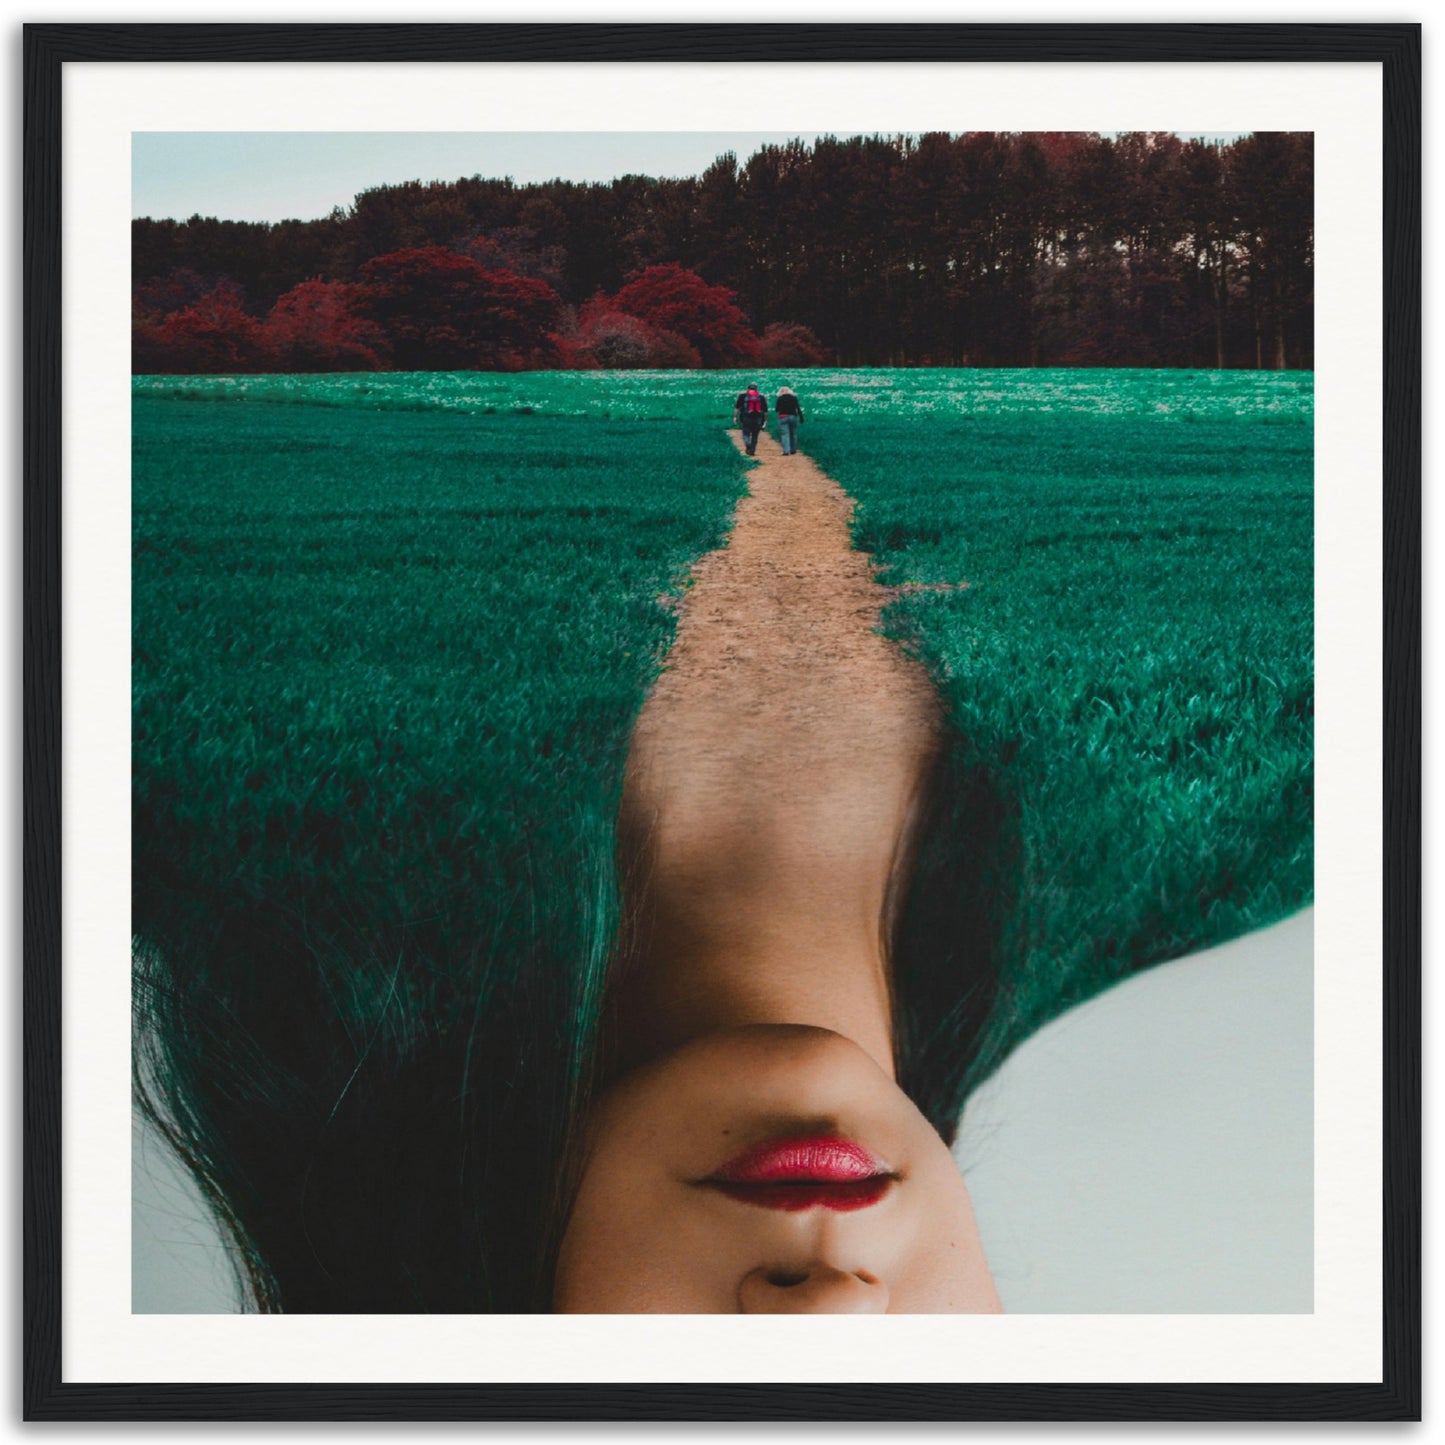 Hiking In The Middle Of Nohair - Museum-Quality Framed Art Print